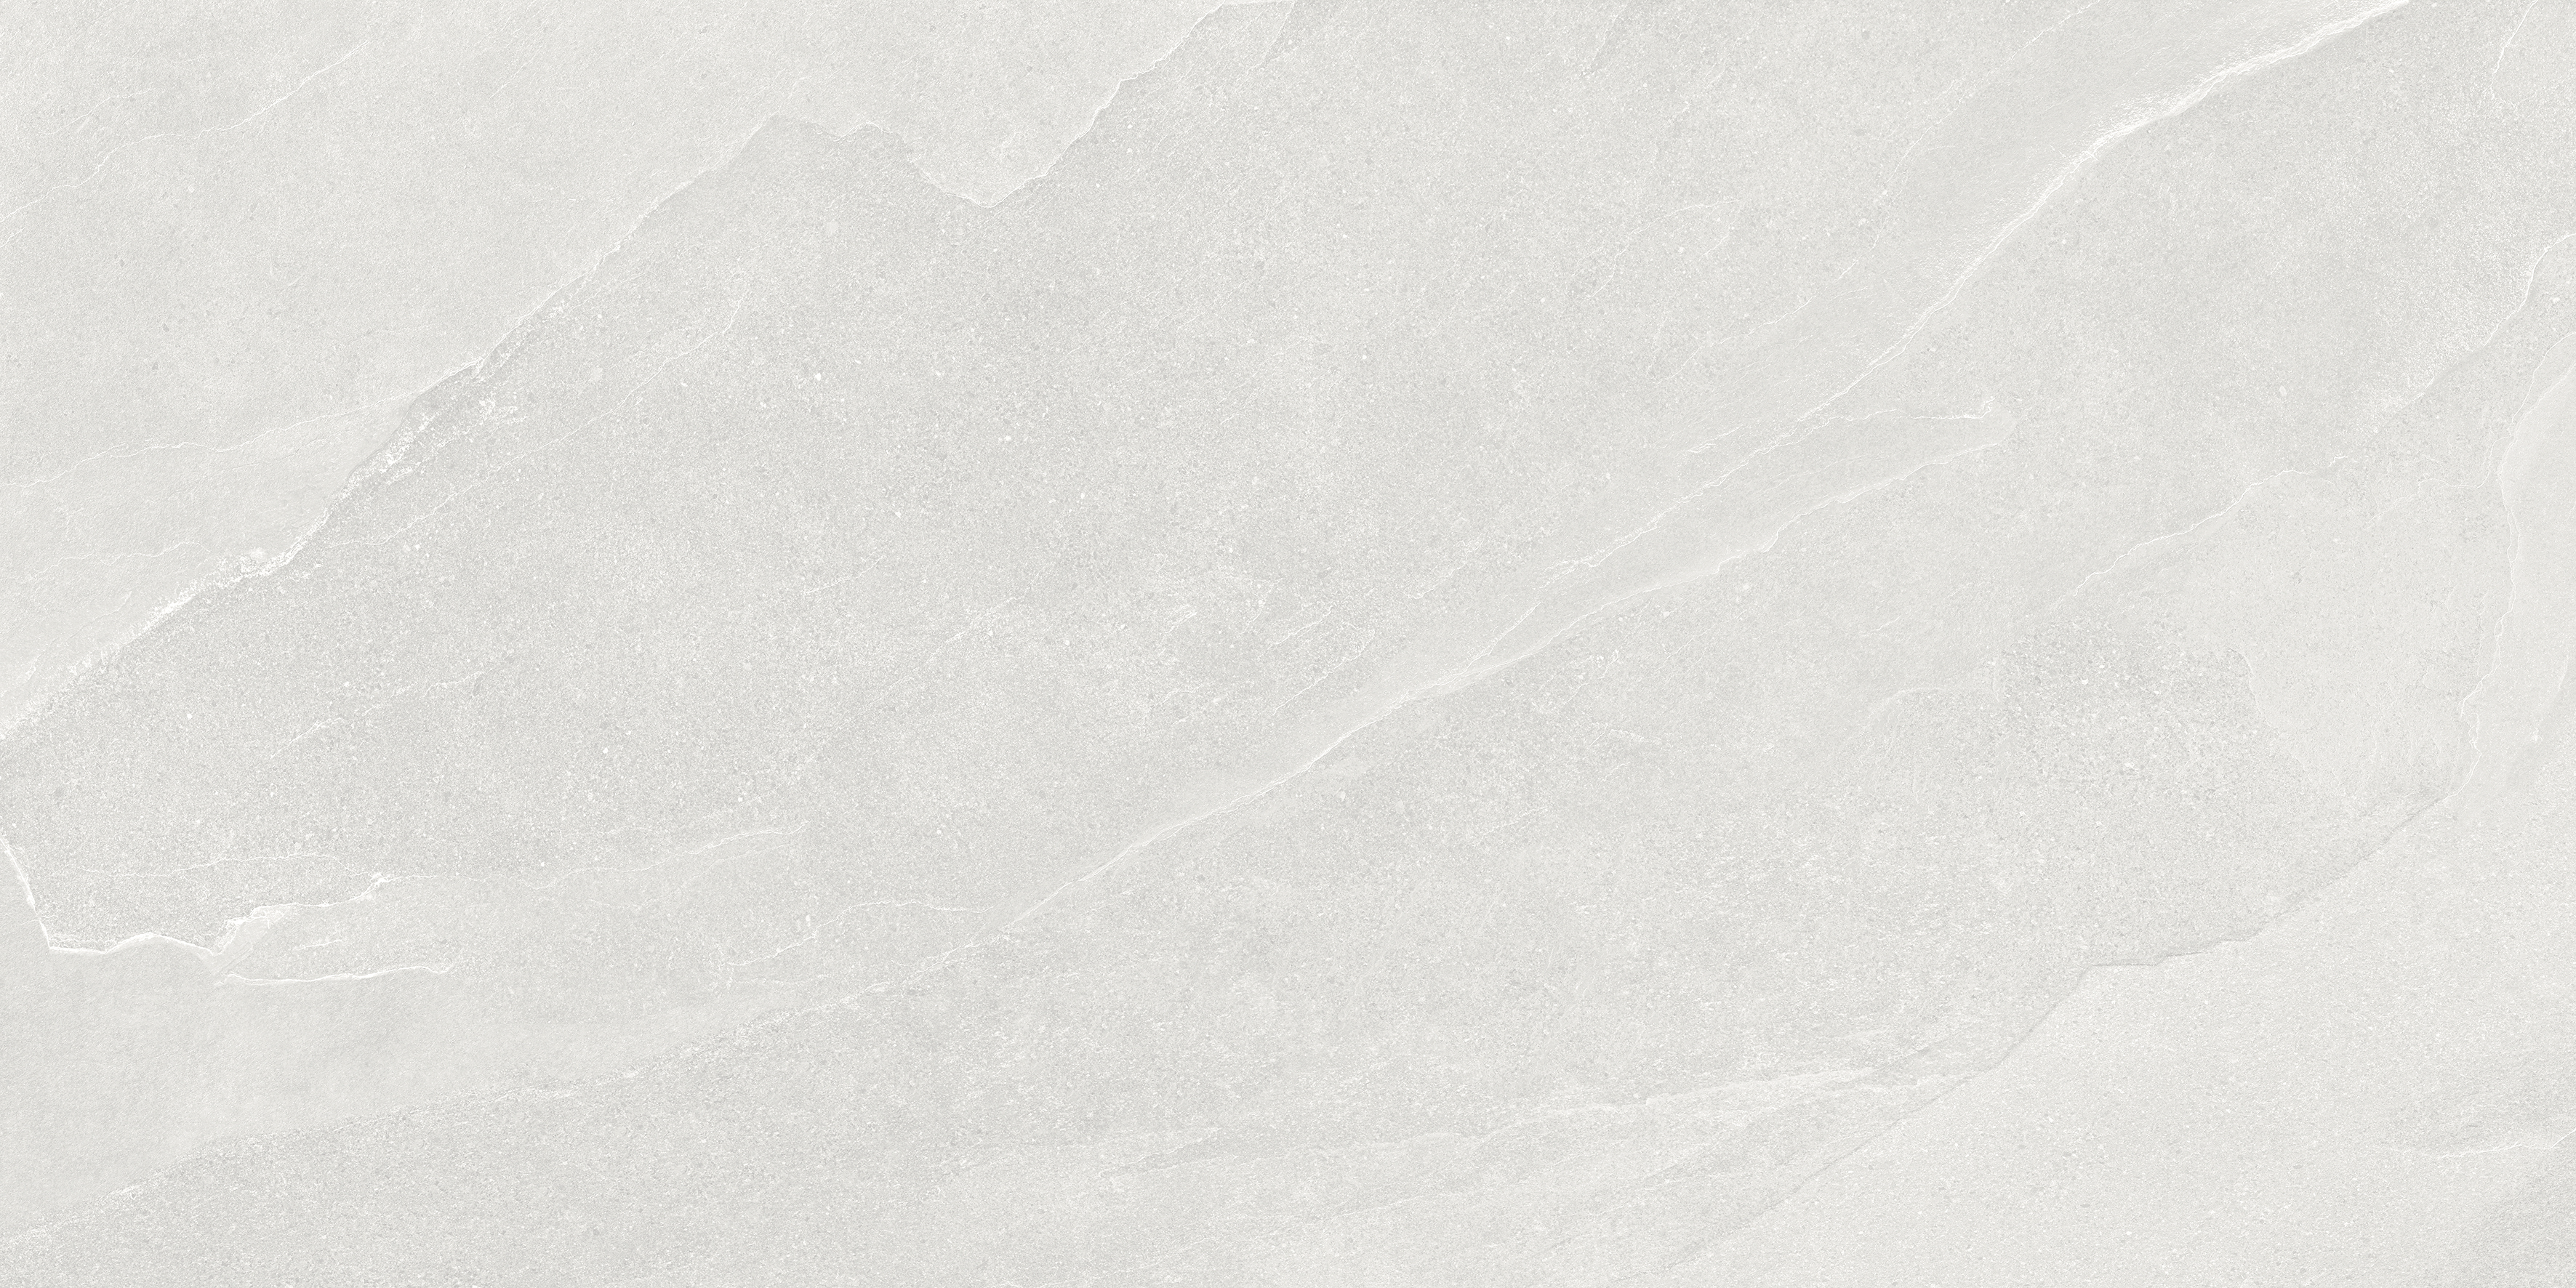 lithium pattern color body porcelain field tile from nord anatolia collection distributed by surface group international matte finish rectified edge 24x48 rectangle shape